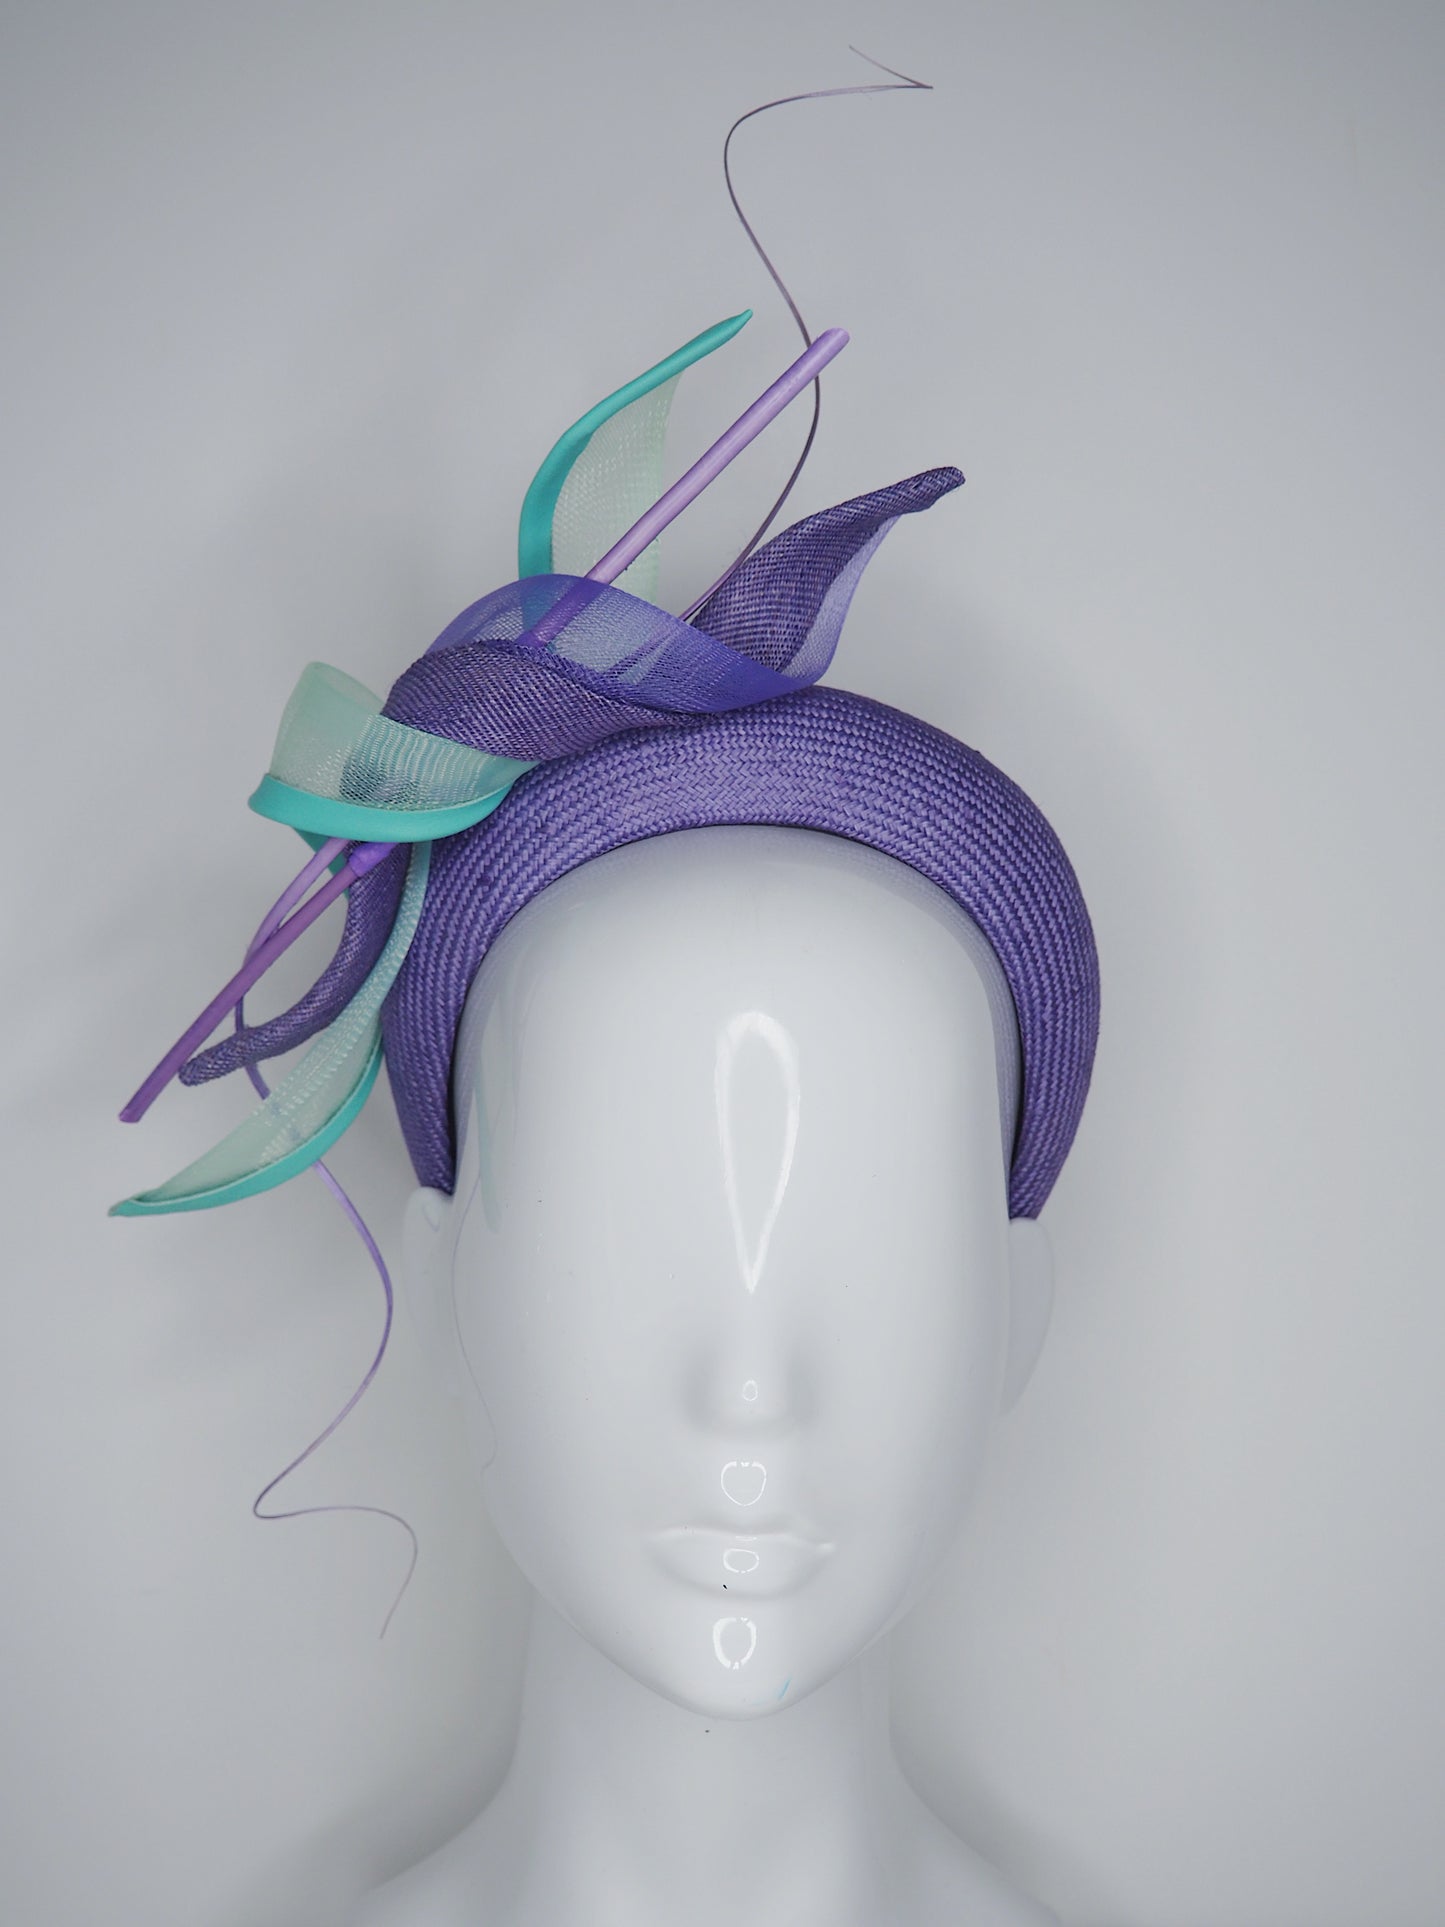 Mint Delight - Deep lilac Parisisal Straw 3d headband with swirls and quills